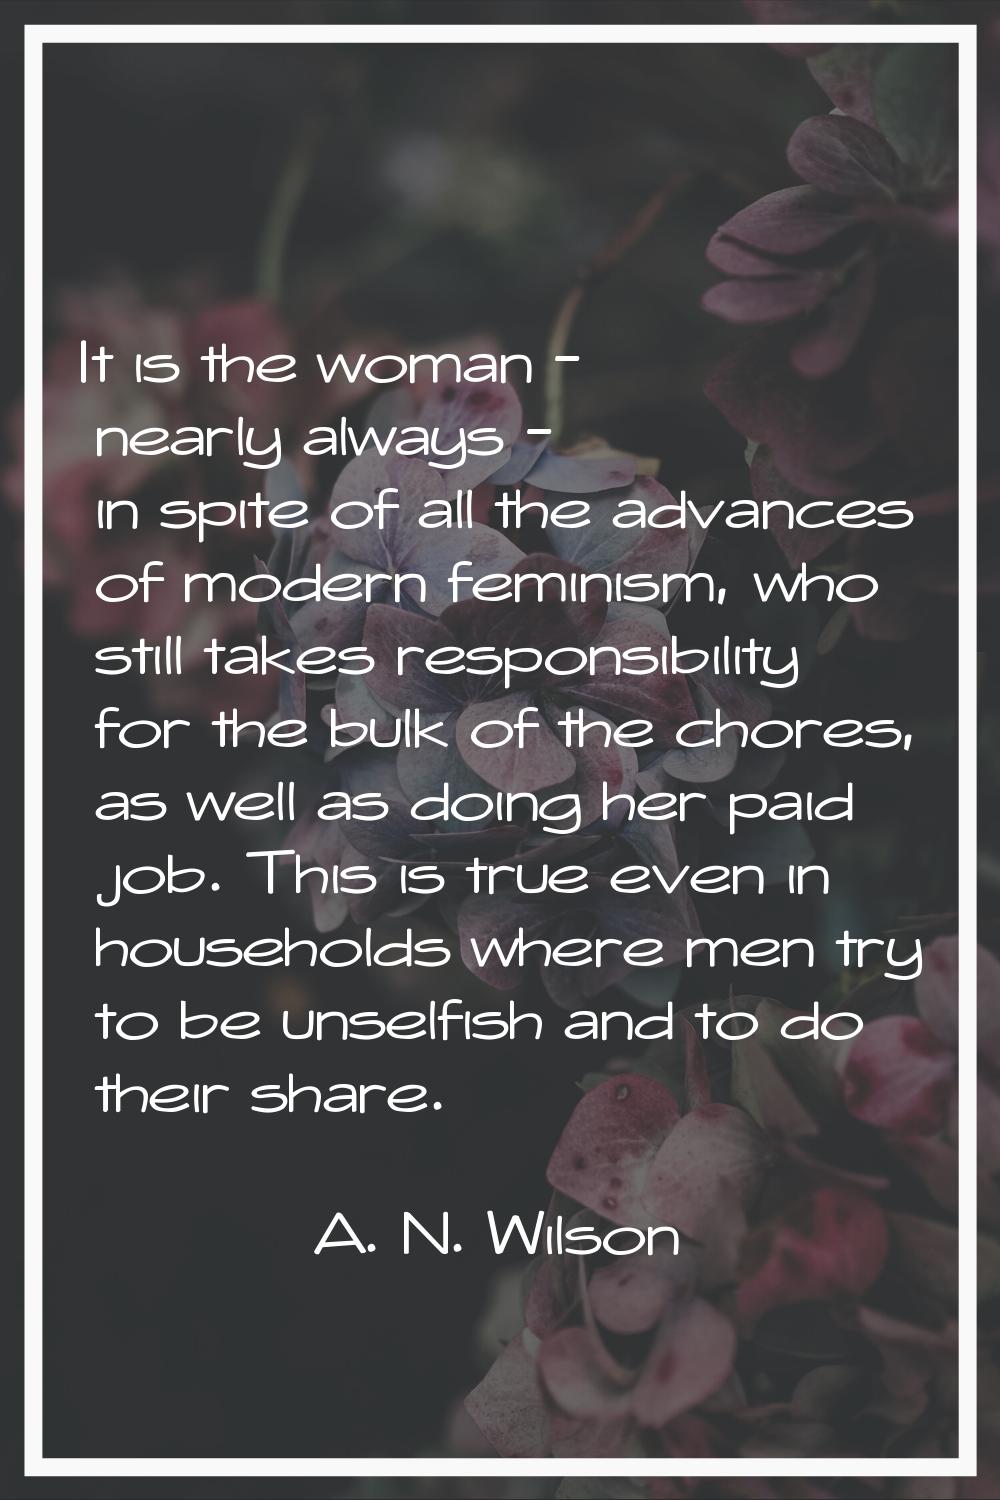 It is the woman - nearly always - in spite of all the advances of modern feminism, who still takes 